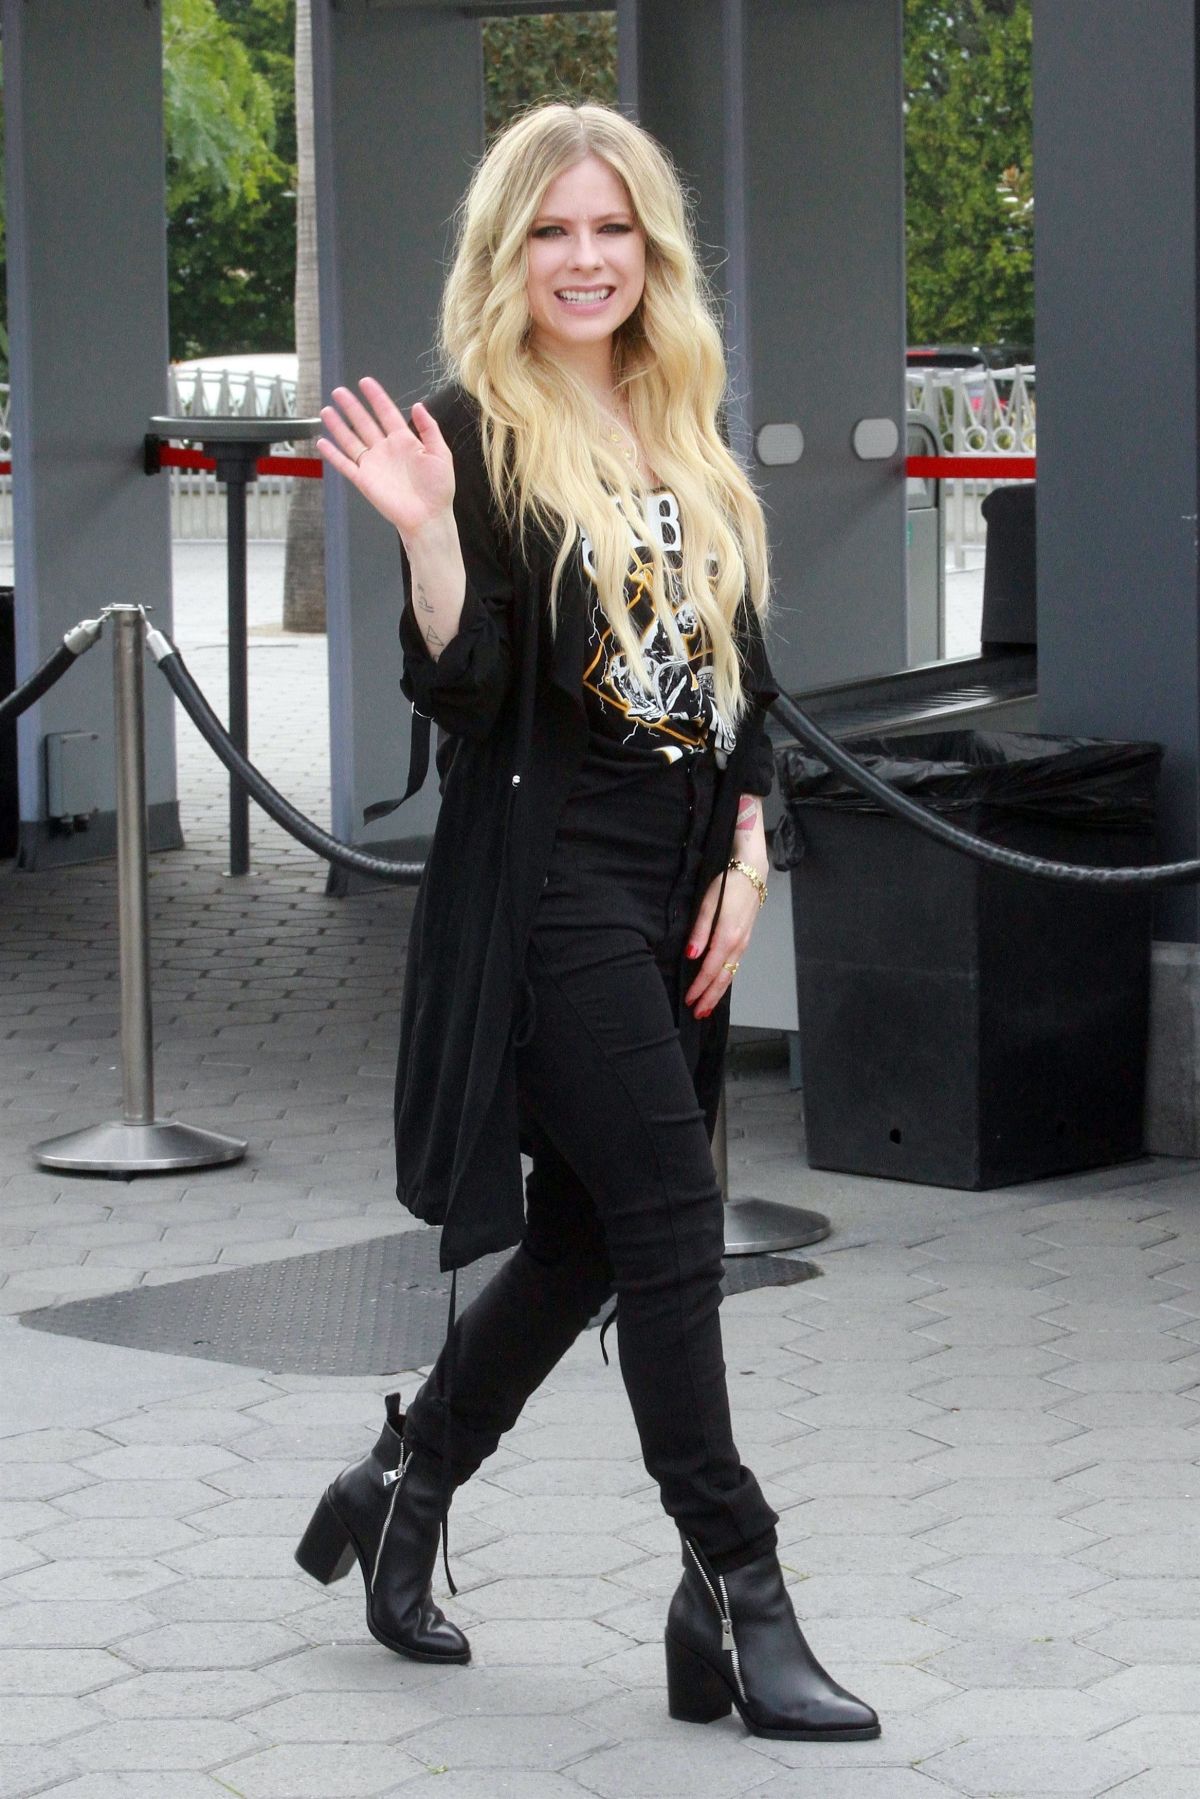 AVRIL LAVIGNE at Extra at Universal Studios in Hollywood 02/27/2019 – HawtCelebs